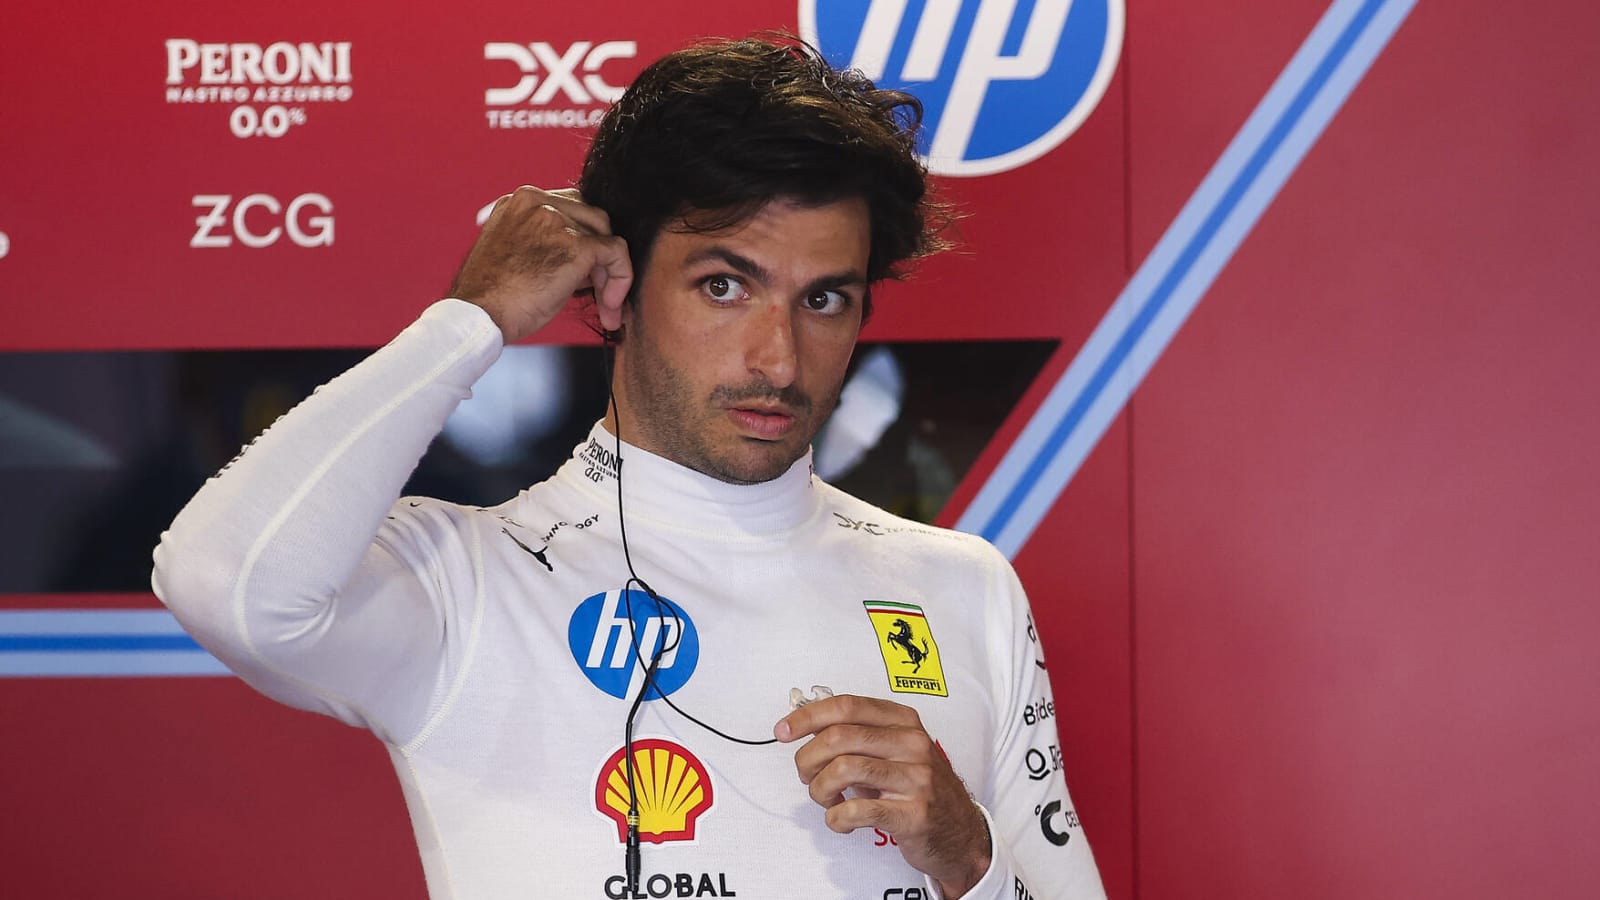 Ex-F1 driver claims Carlos Sainz ‘best option’ for Red Bull if Max Verstappen leaves